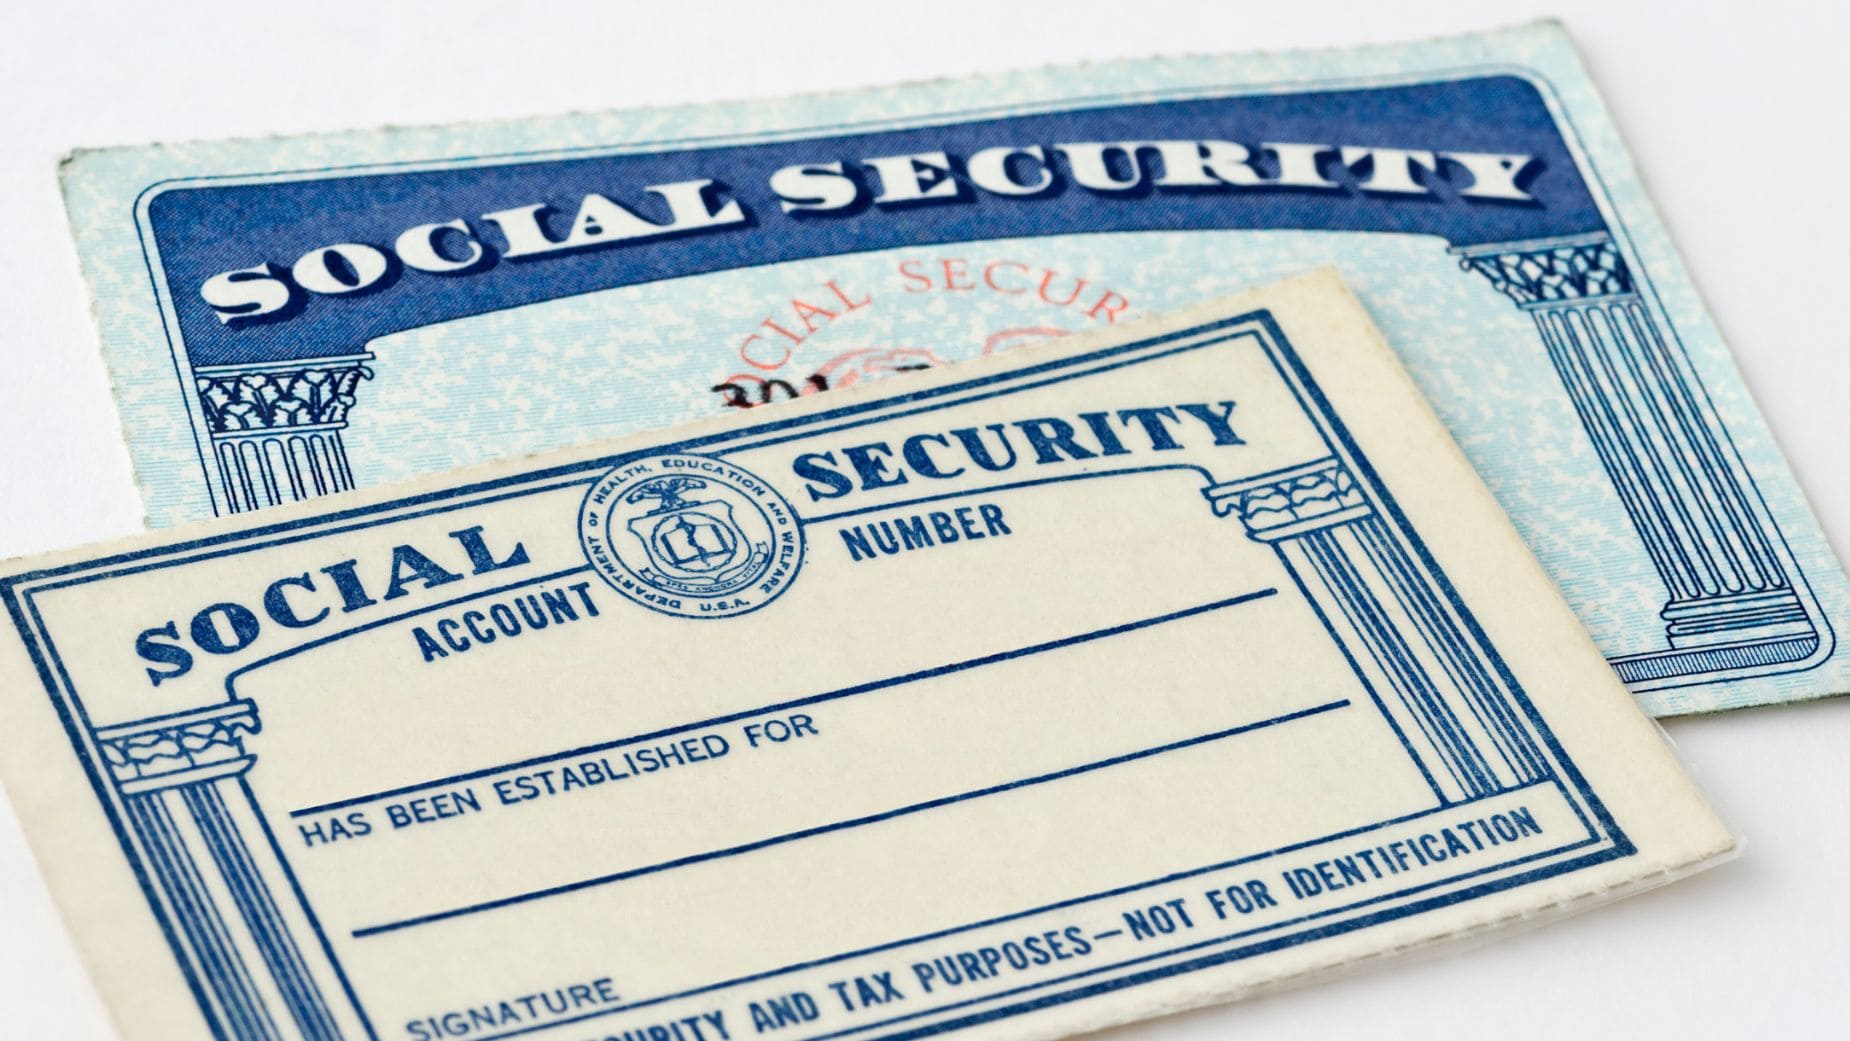 The year of retirement is important to know when we collect Social Security every month